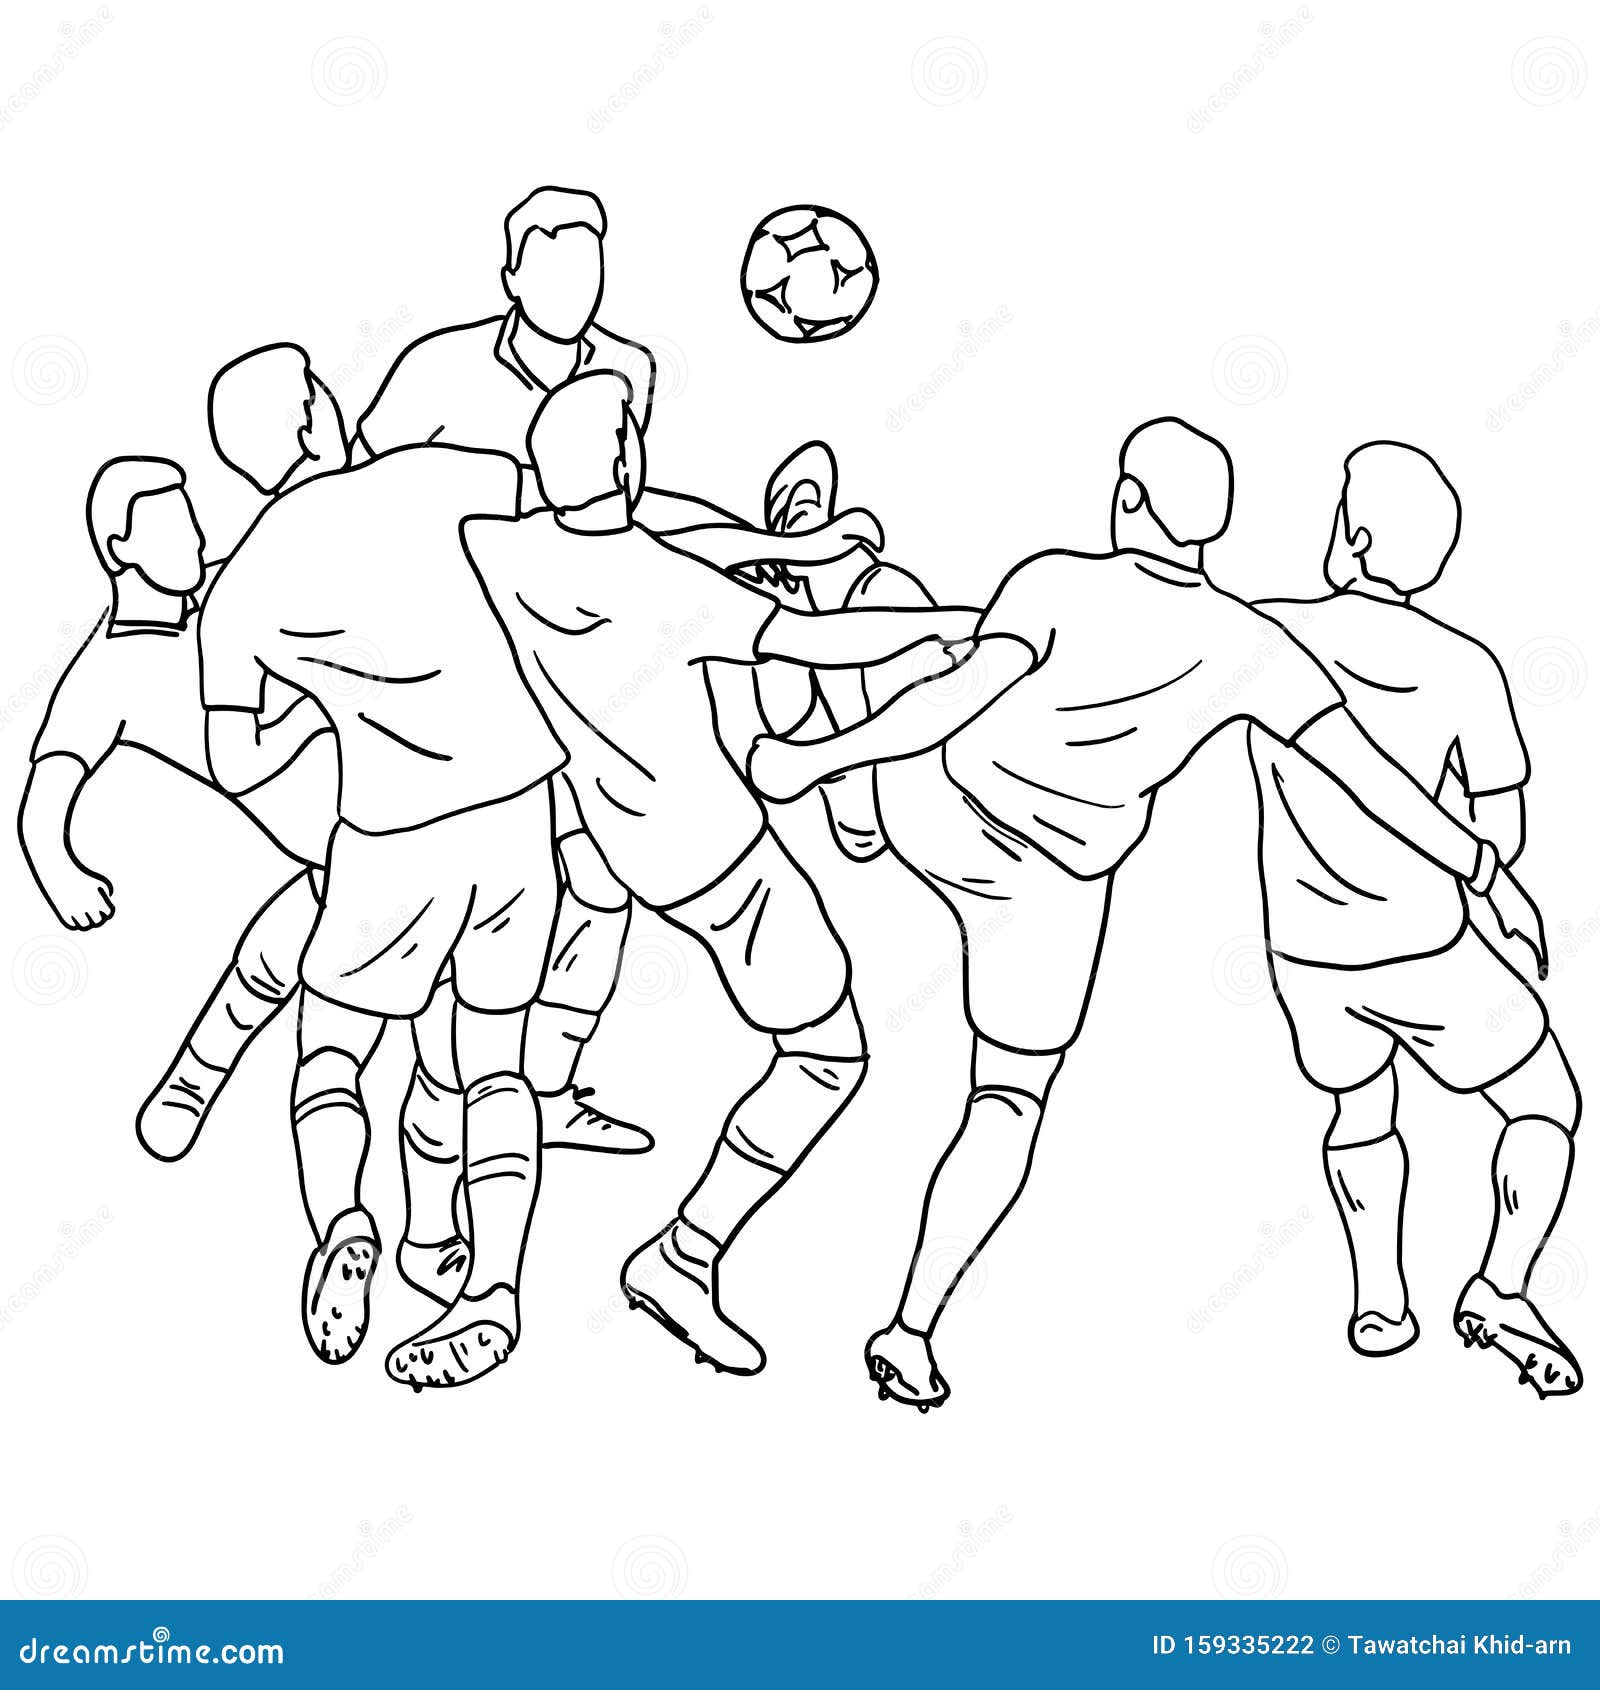 Football players icons dynamic cartoon sketch vectors stock in format for  free download 1.27MB